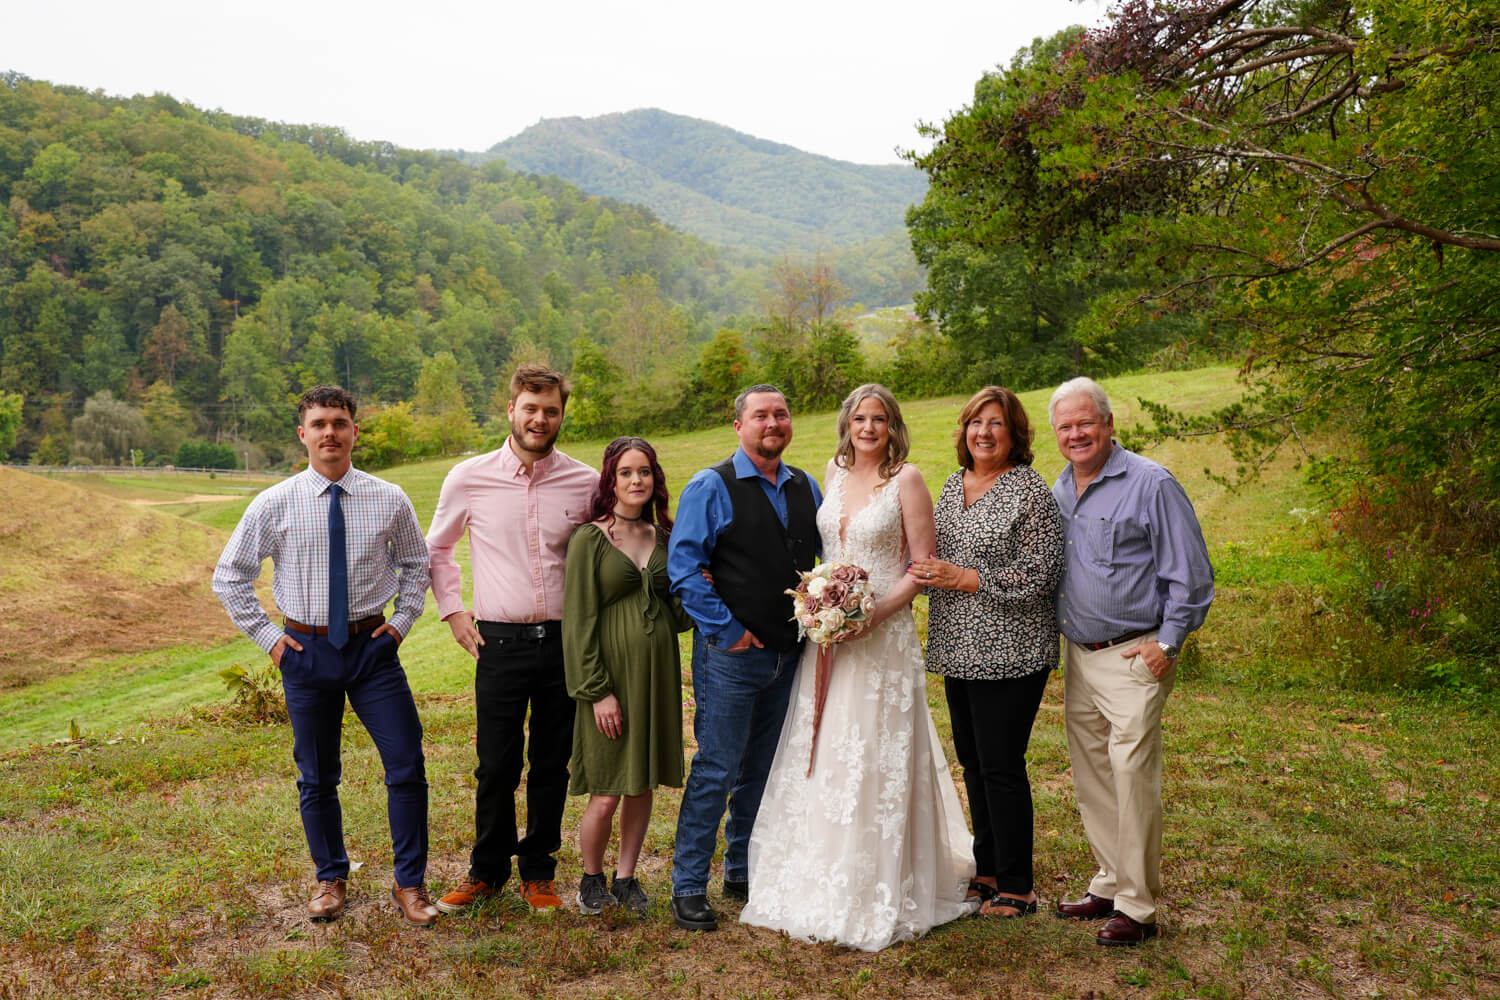 Wedding family group photo at a mountain view ceremony site in Pigeon Forge called Honeysuckle Hills